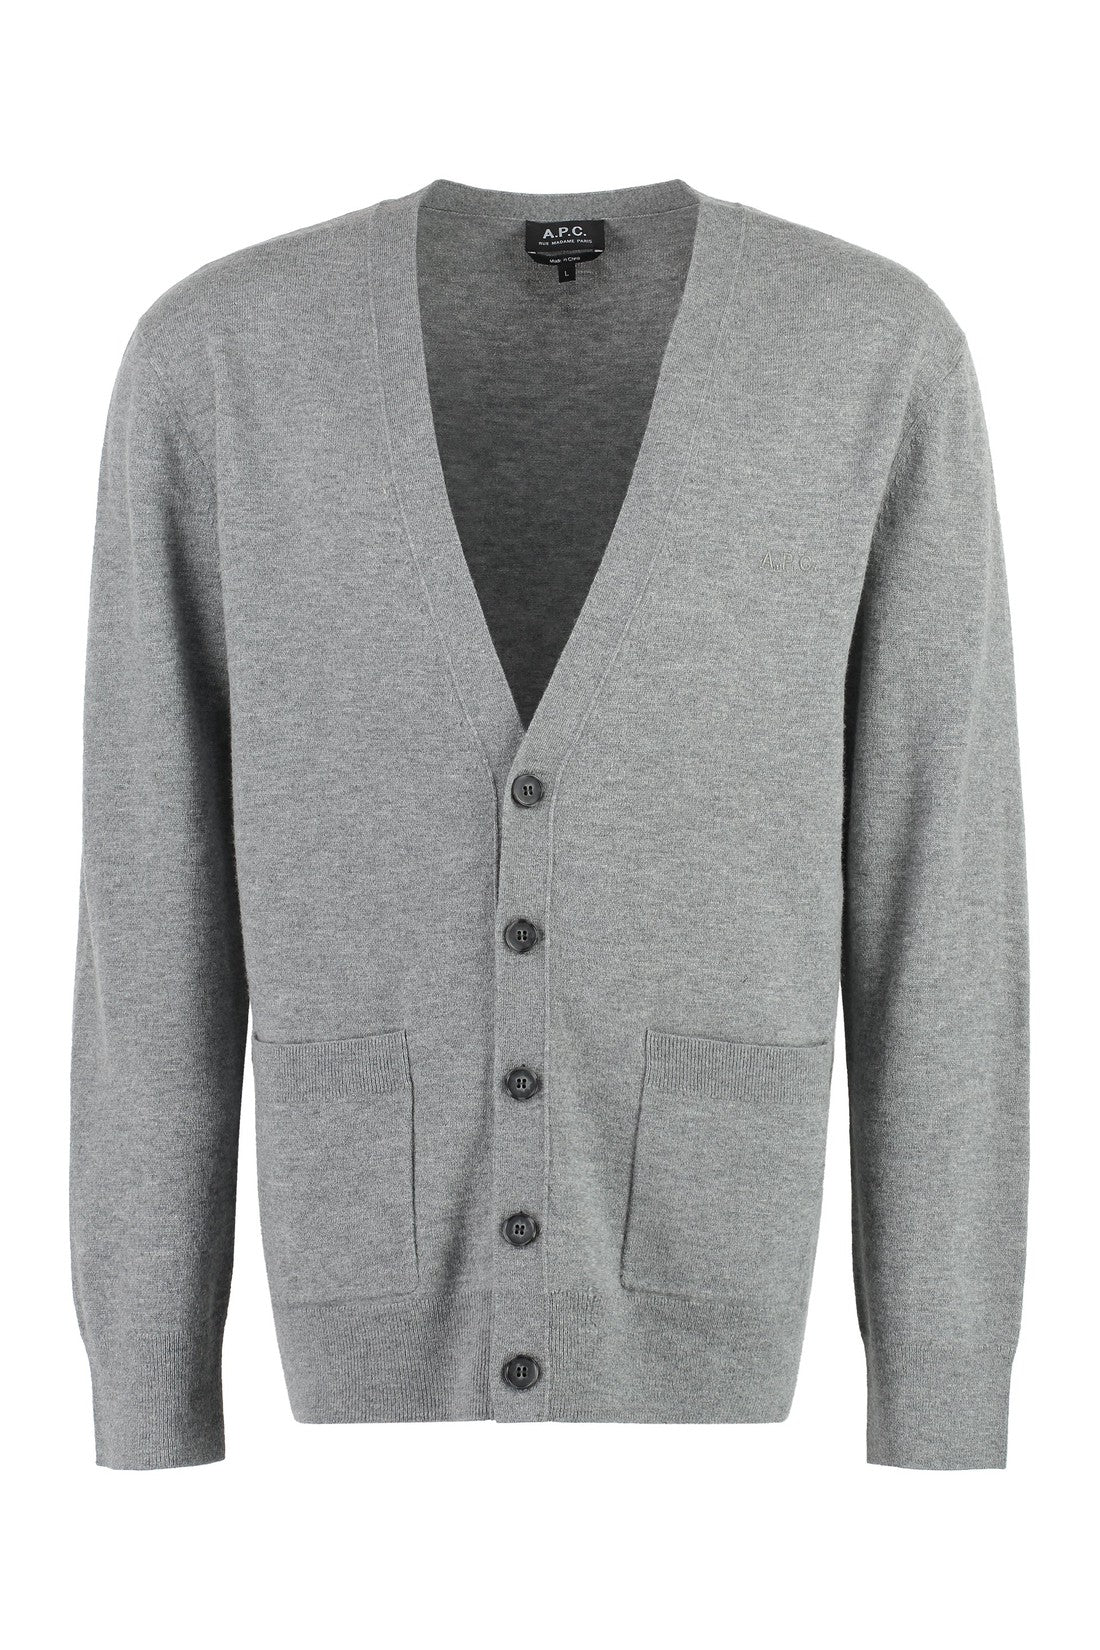 A.P.C.-OUTLET-SALE-Theo virgin wool cardigan-ARCHIVIST